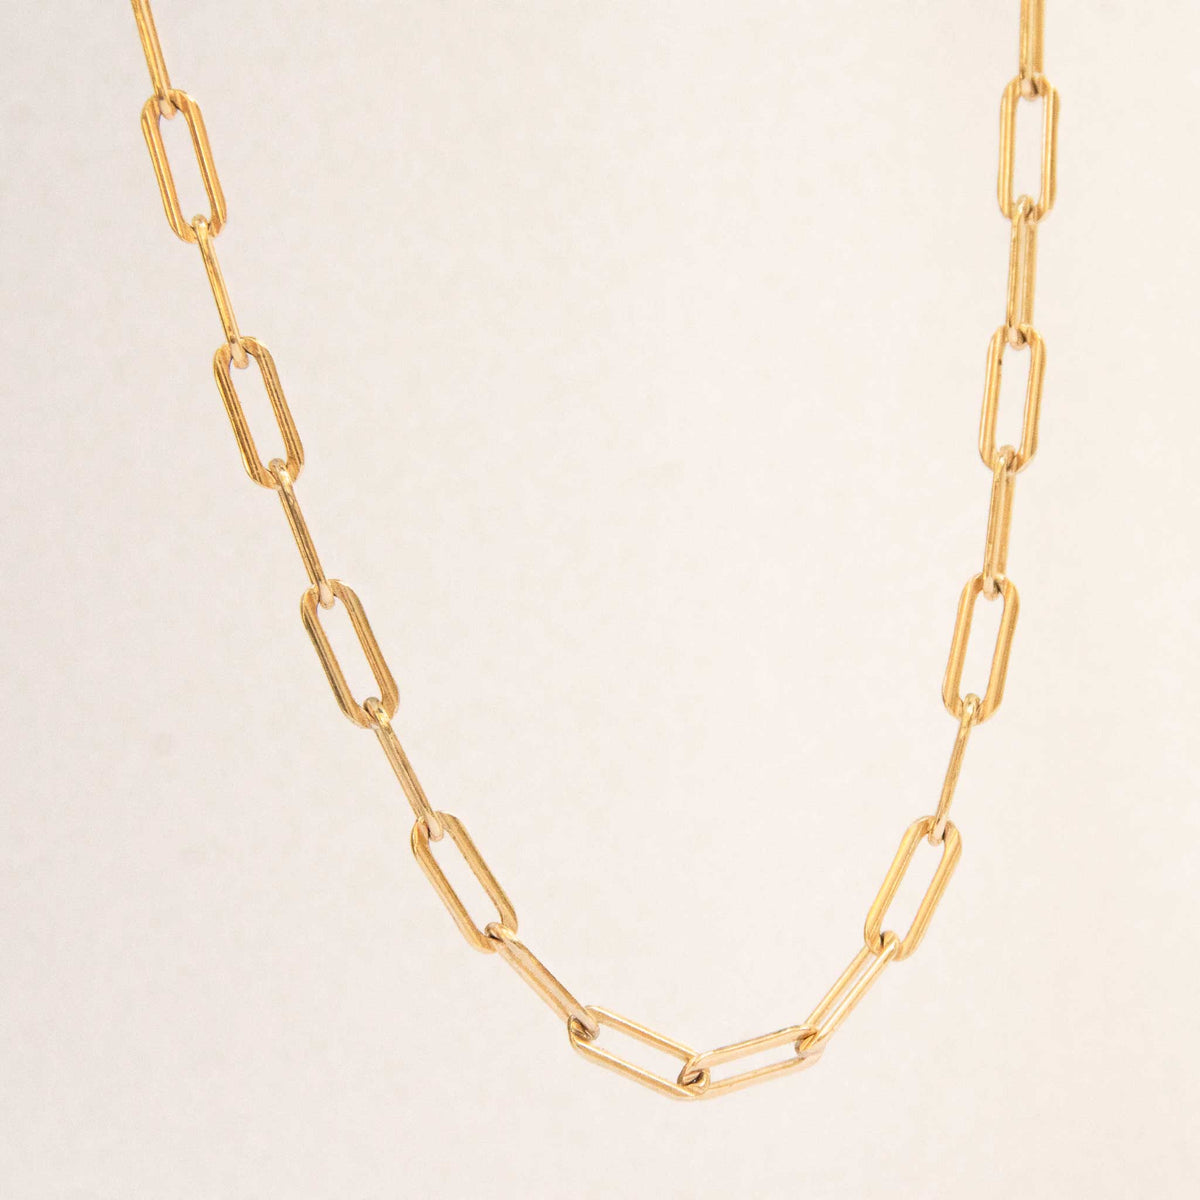 Half of the bold link necklace hanging with a white solid background.